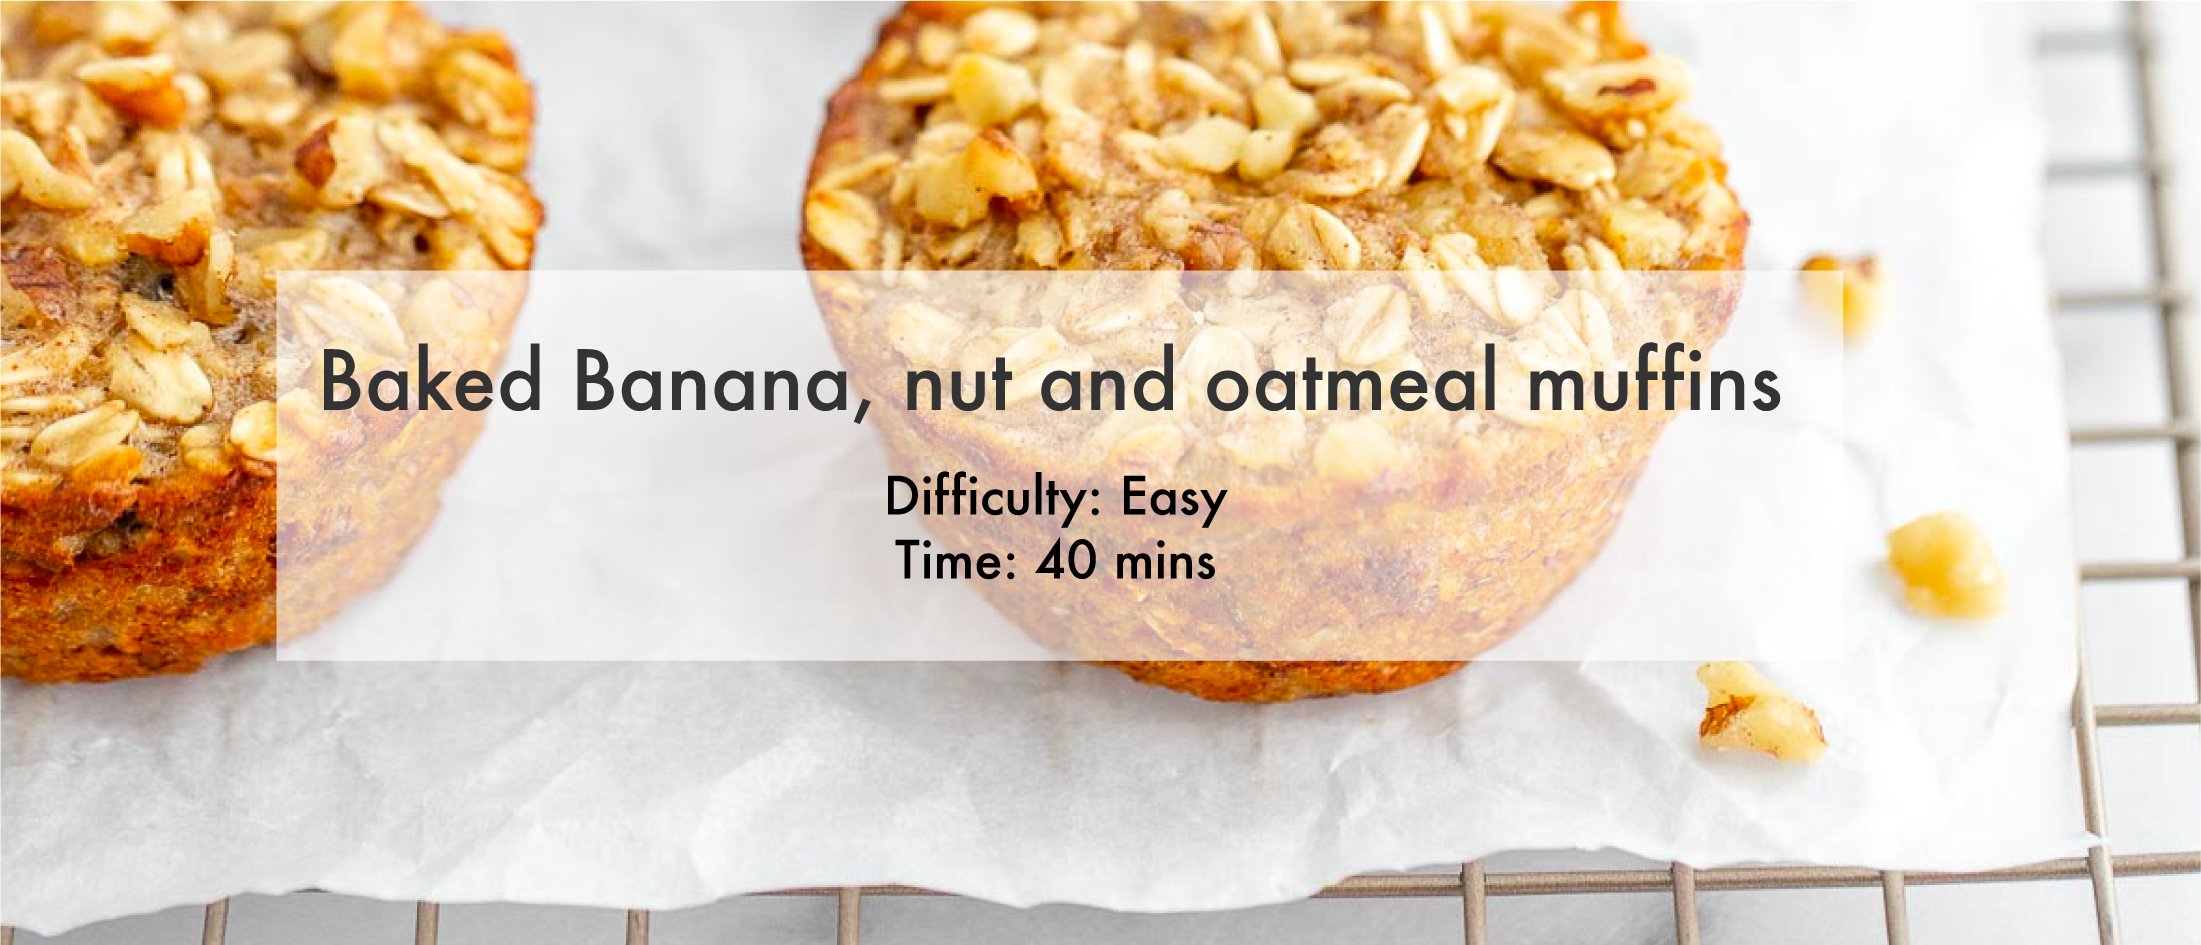 Baked Banana, nut, and oatmeal muffins recipe